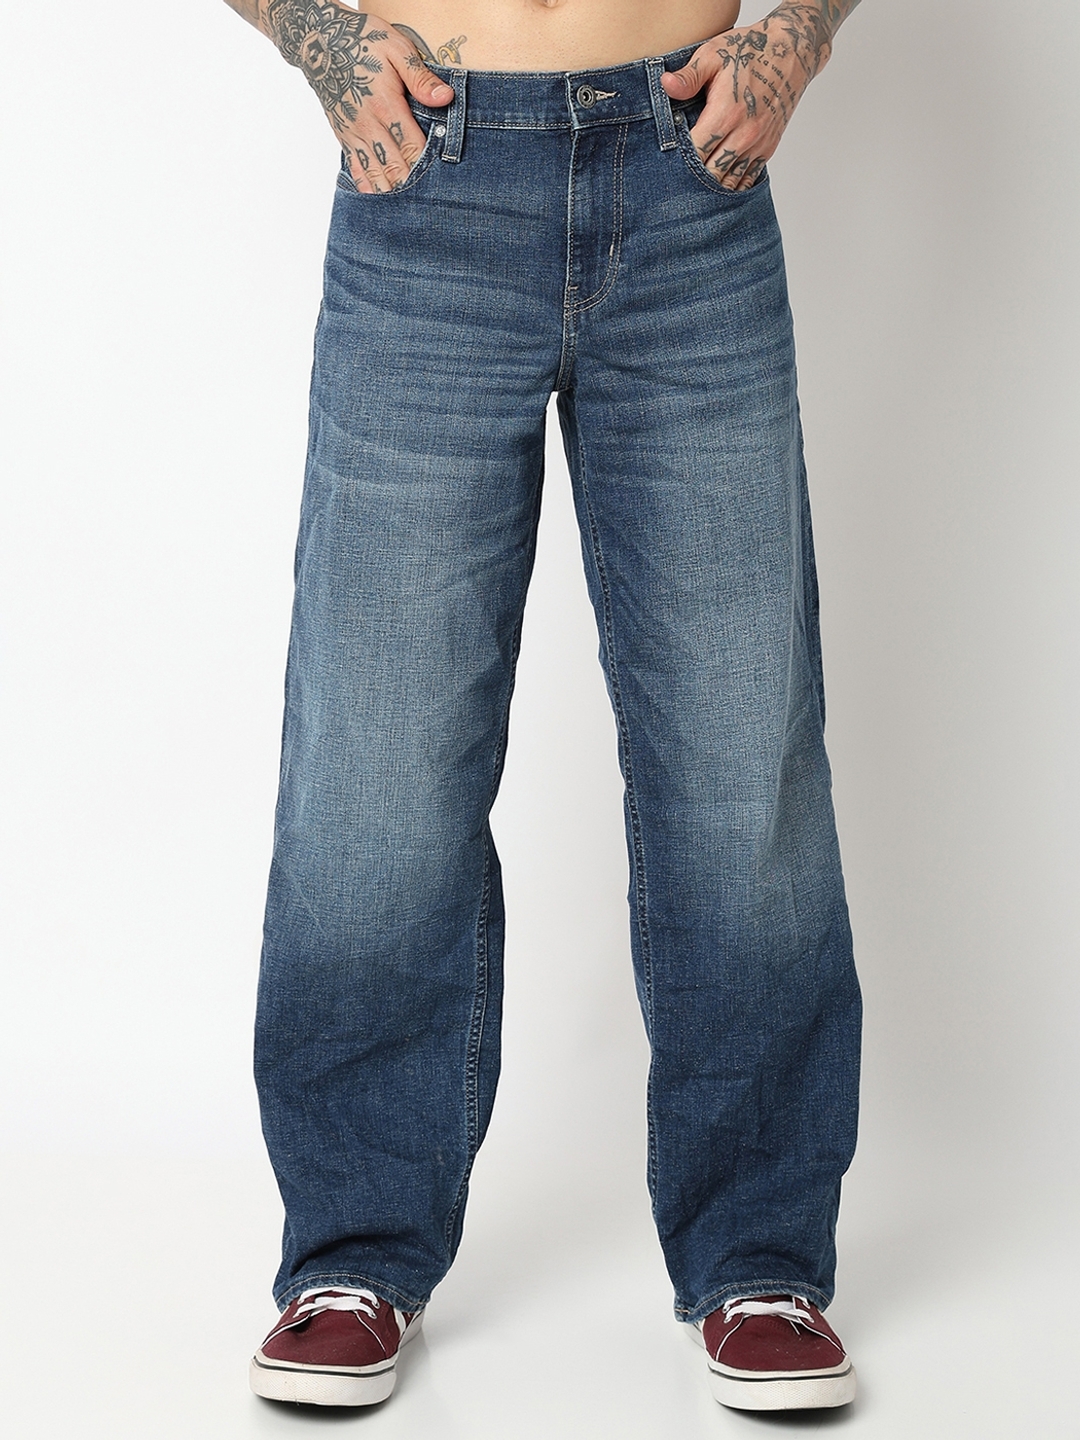 Buy GAS Solid Cotton Stretch Slim Fit Boys Jeans | Shoppers Stop